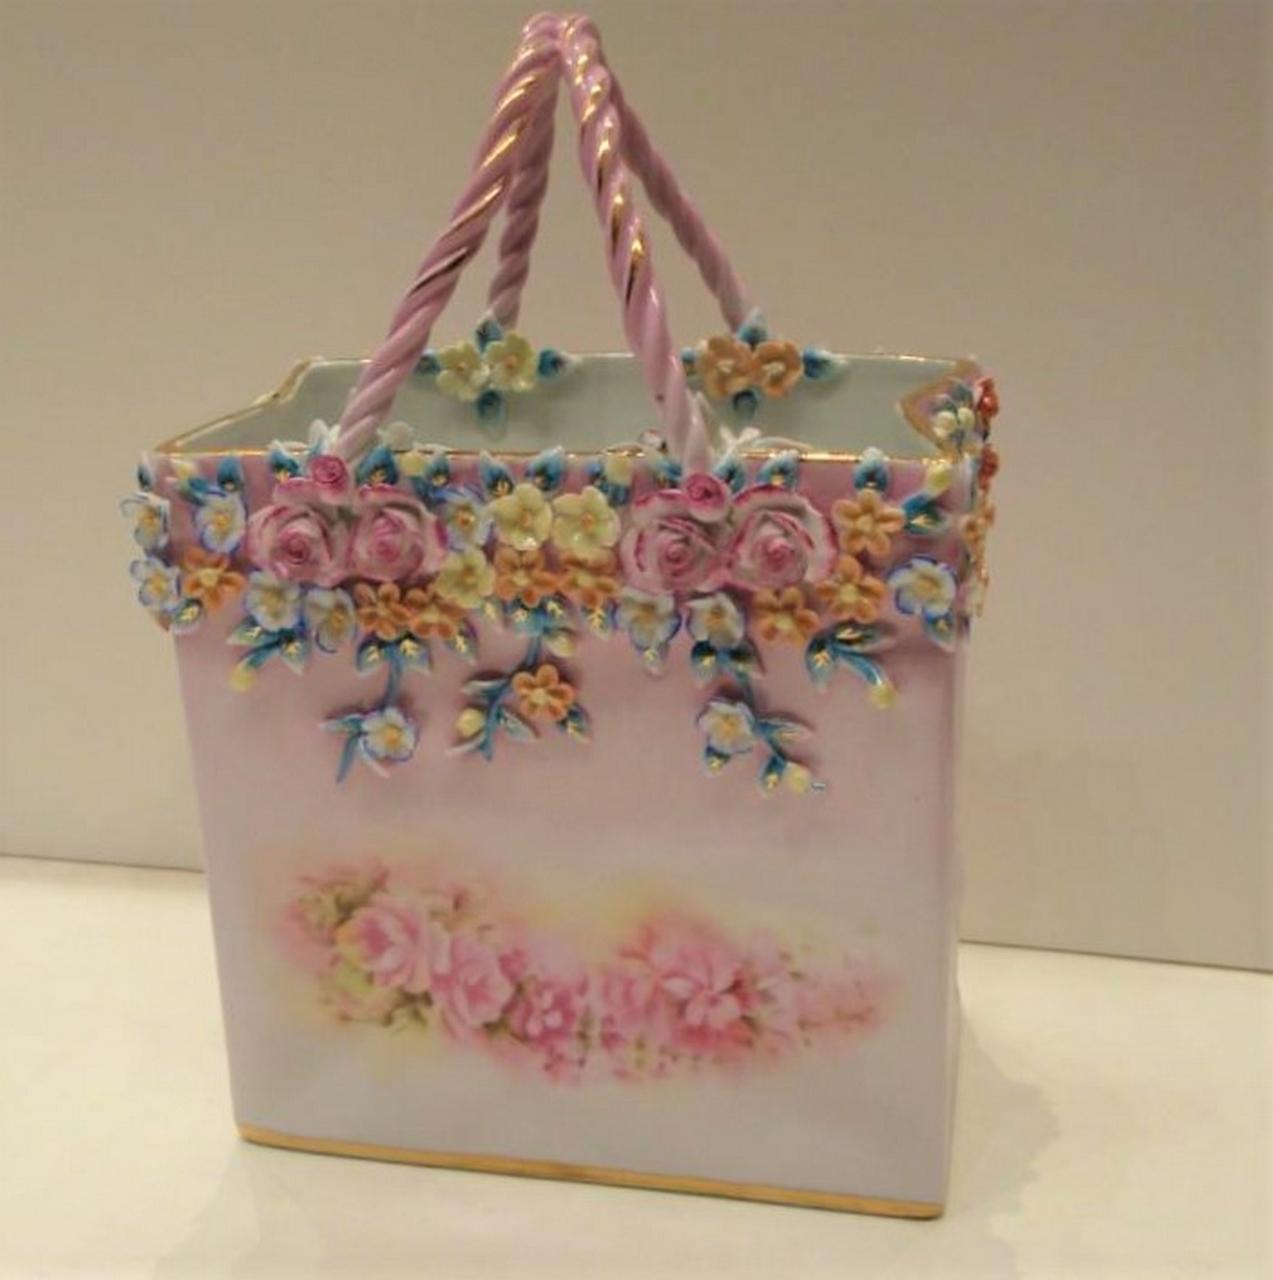 The following Item we are offering is a Spectacular Handpainted Sevres Style / Dresden Style Porcelain Shopping Bag/ Basket with Intricate Colorful Floral Motifs outside and inside of Basket. Basket is laced with braided intertwined handles. Taken